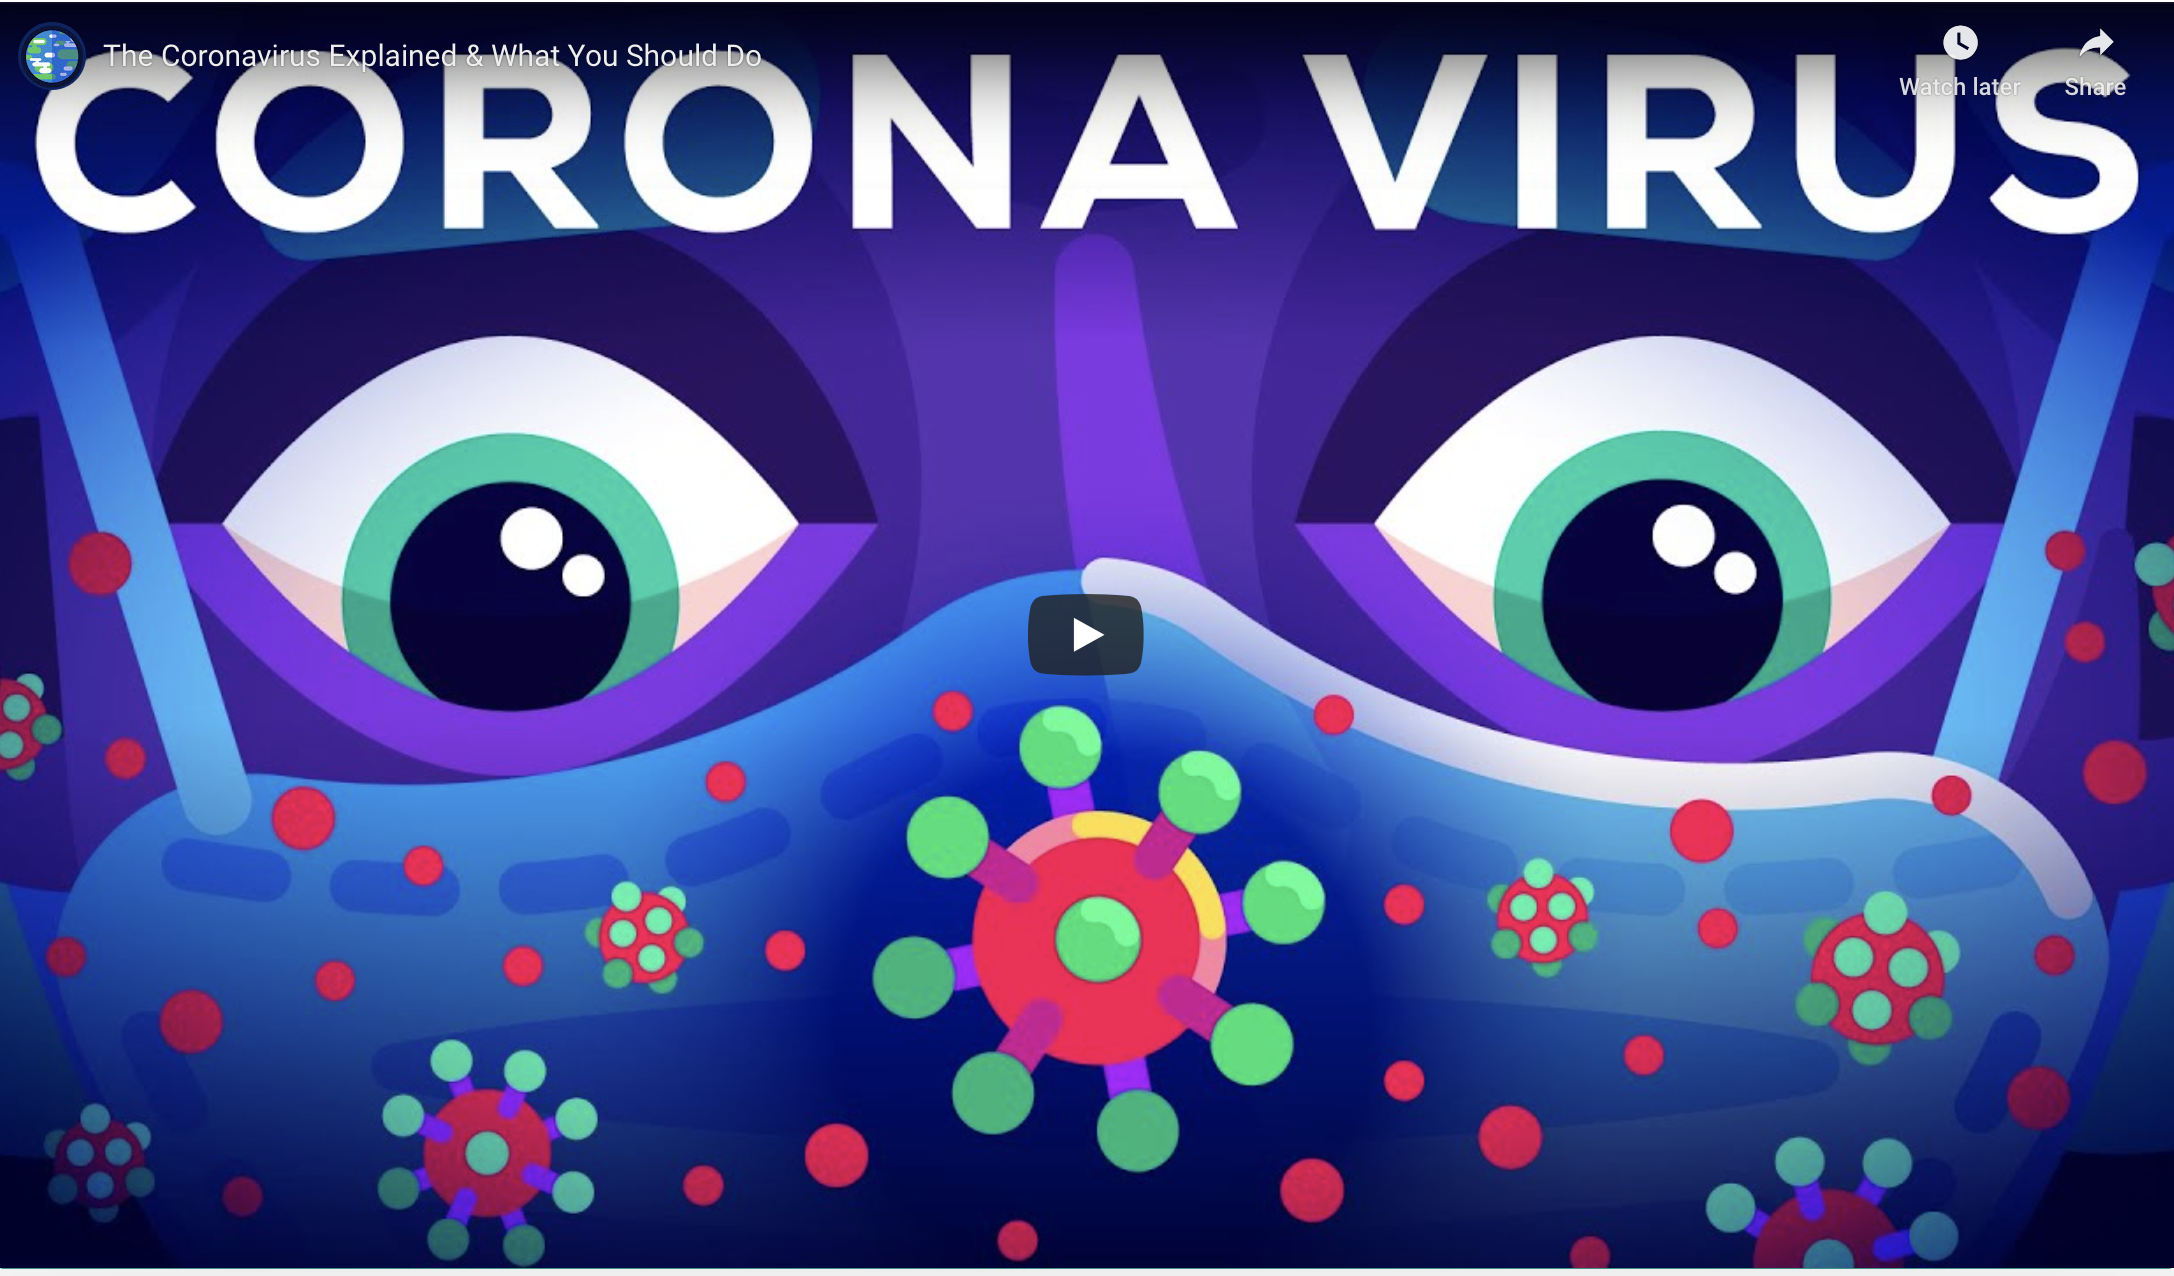 A Very Informative Video On Corona Virus and What You Should Do